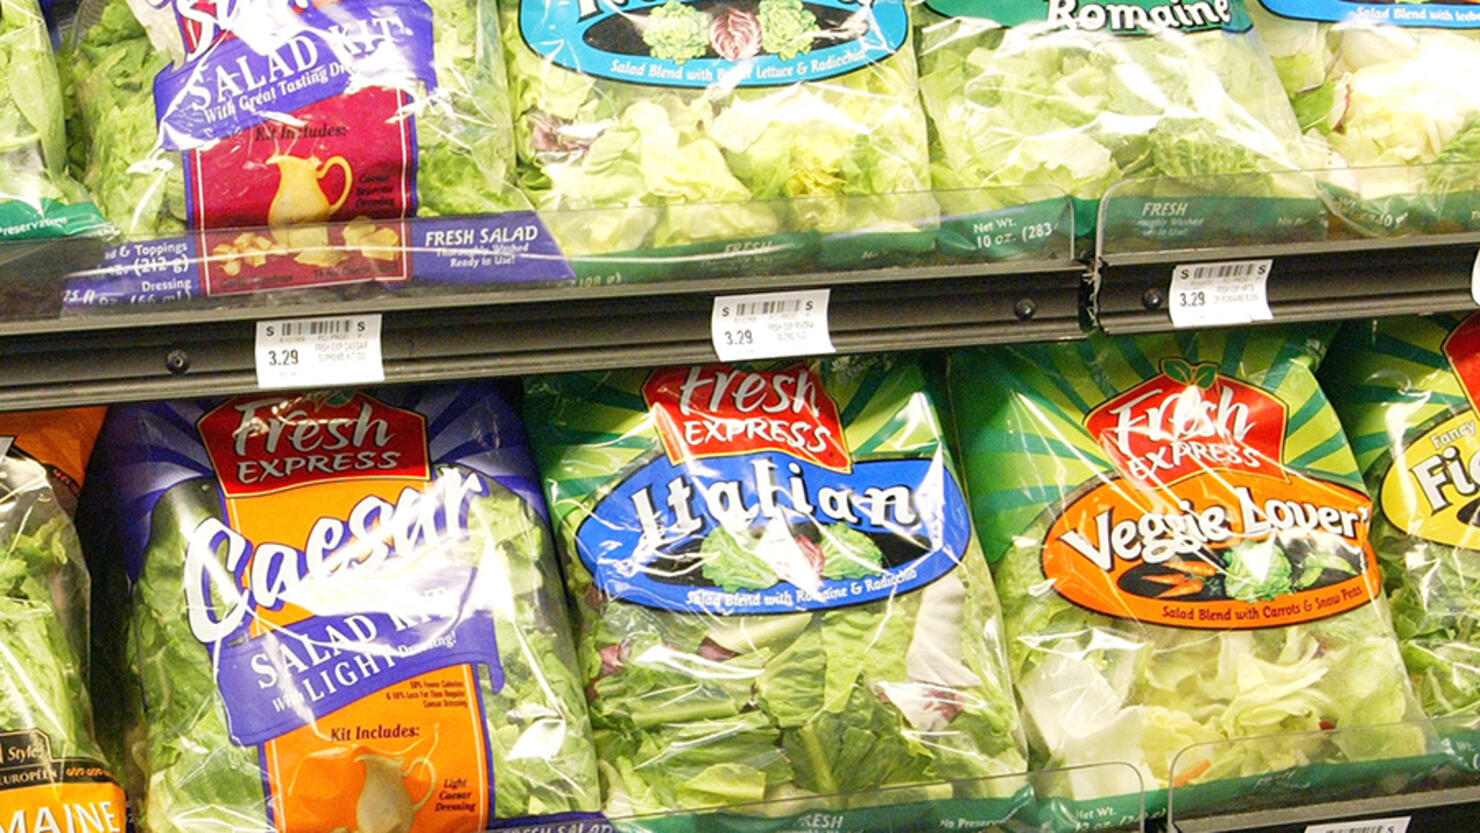 Packaged Salad Is The Second Fastest Selling Item On Grocery Shelves